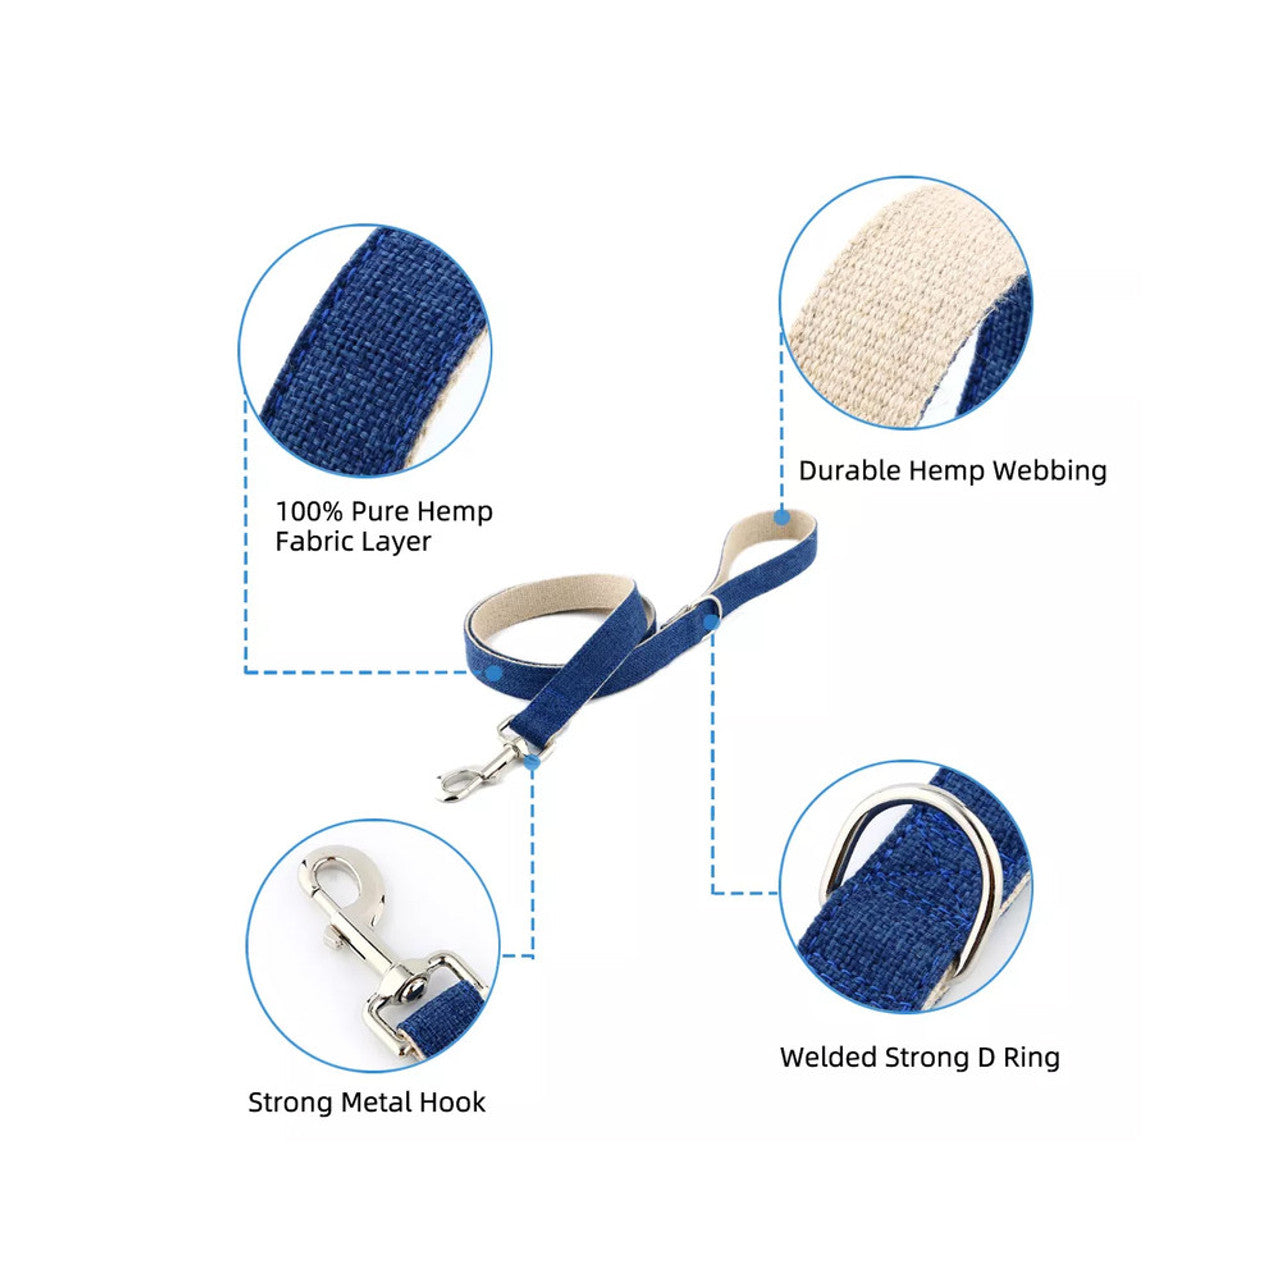 Detailed images showing the fabric and metal fixtures of the Close up photo of Organic Hemp & Cotton Dog lead shown in ink blue on a white background